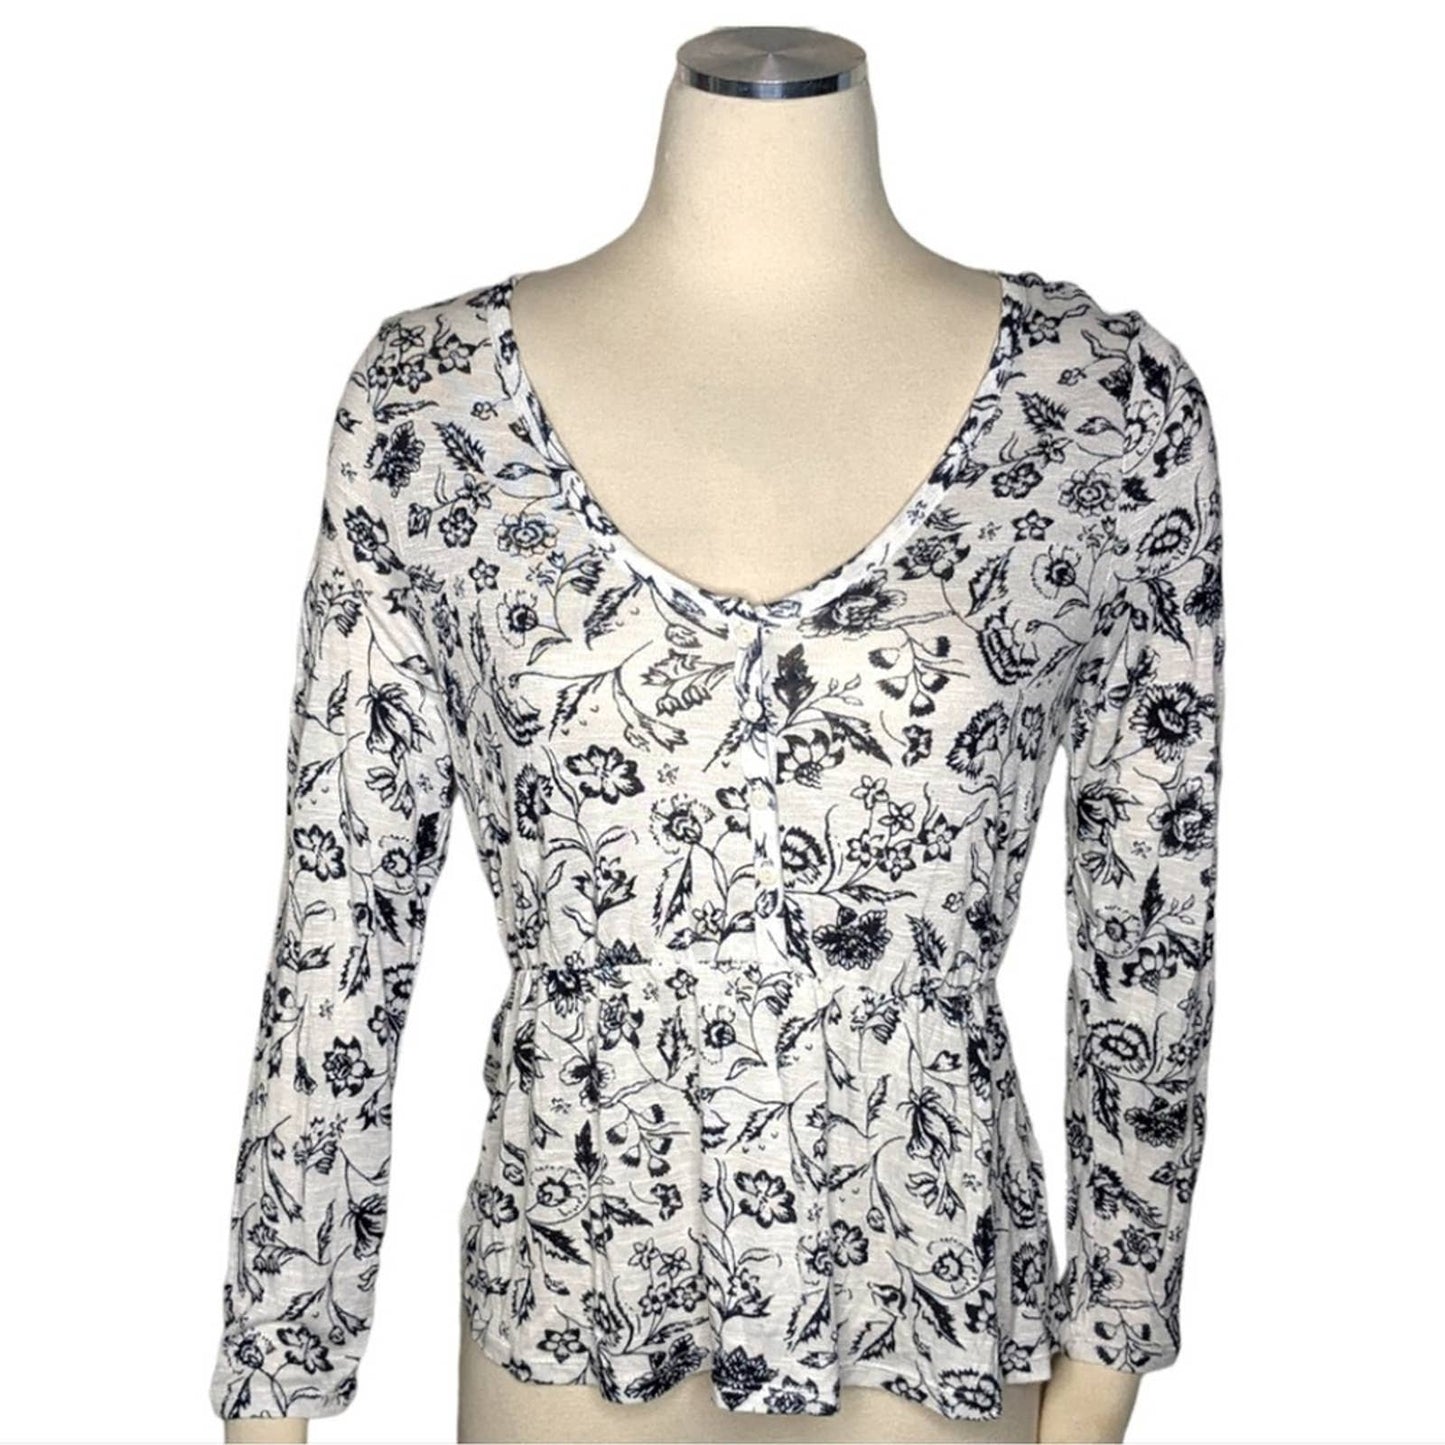 LUCKY BRAND White Navy Floral Button V-Neck Top Cinched Waist XS